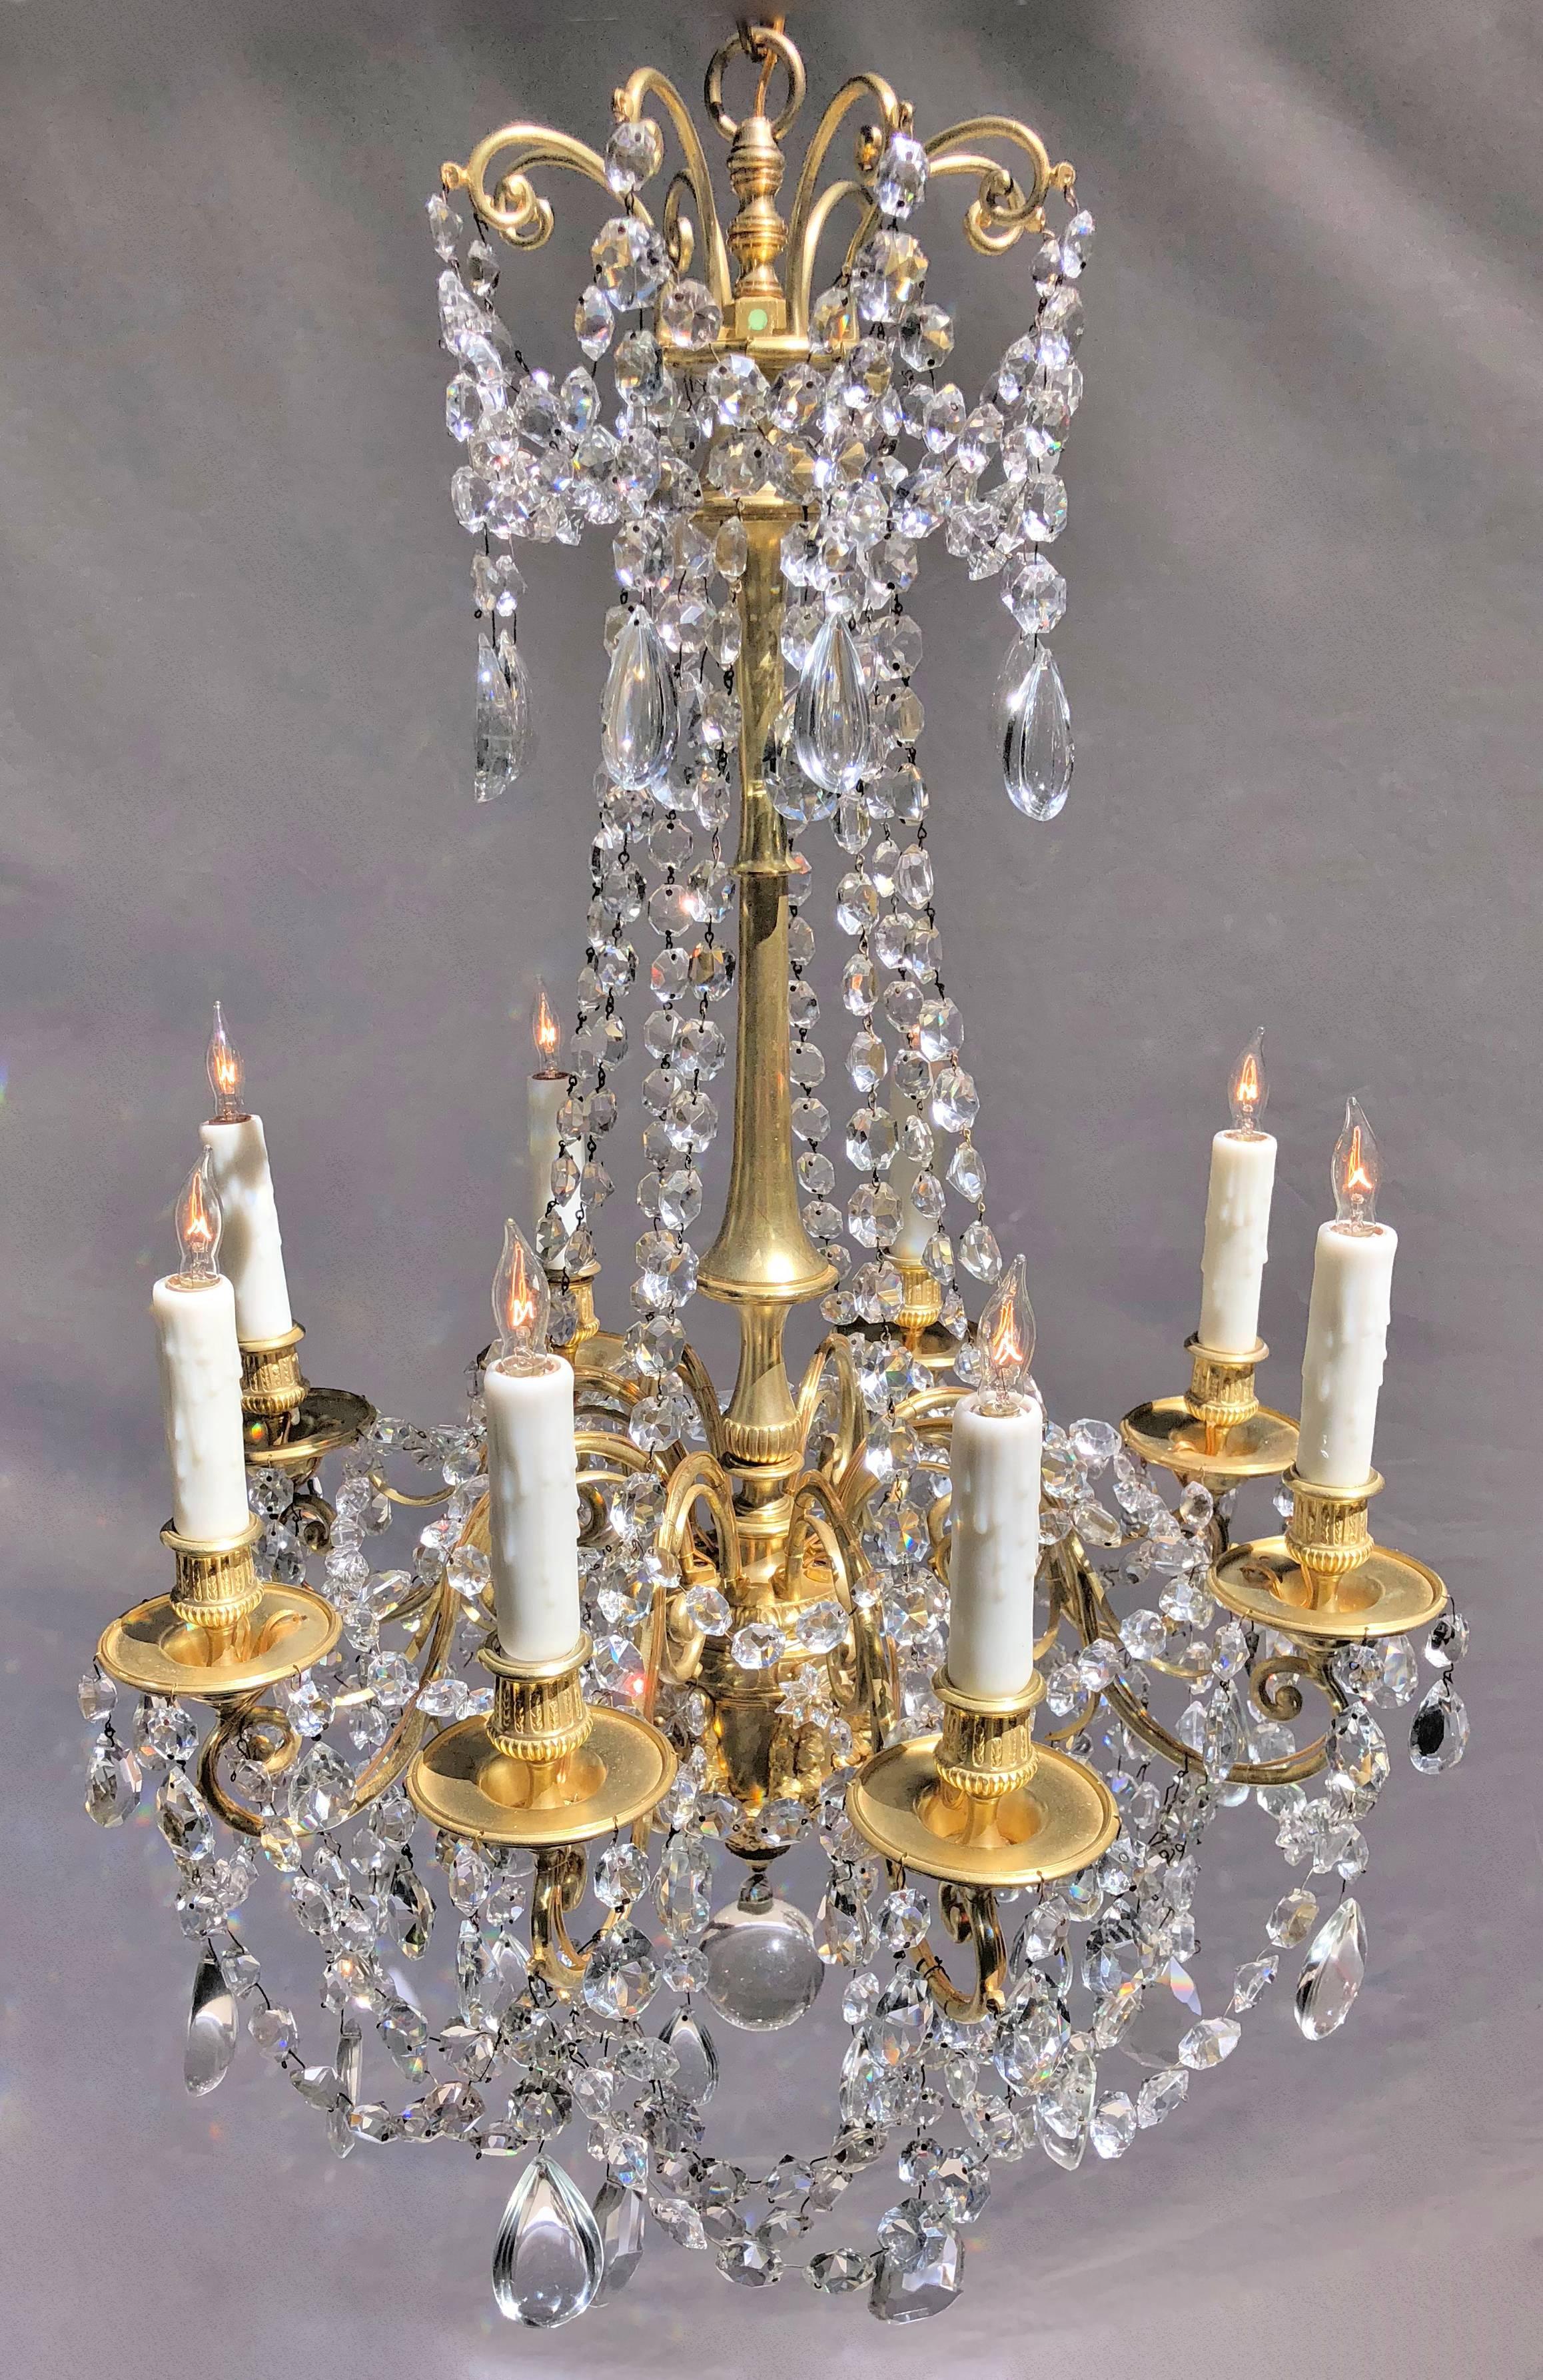 This Louis XVI chandelier was originally candle and has since been rewired and electrified. The crown has eight bronze scrolls with swaged crystal chains. Bronze center column comes down to console holding eight solid bronze scrolled arms with